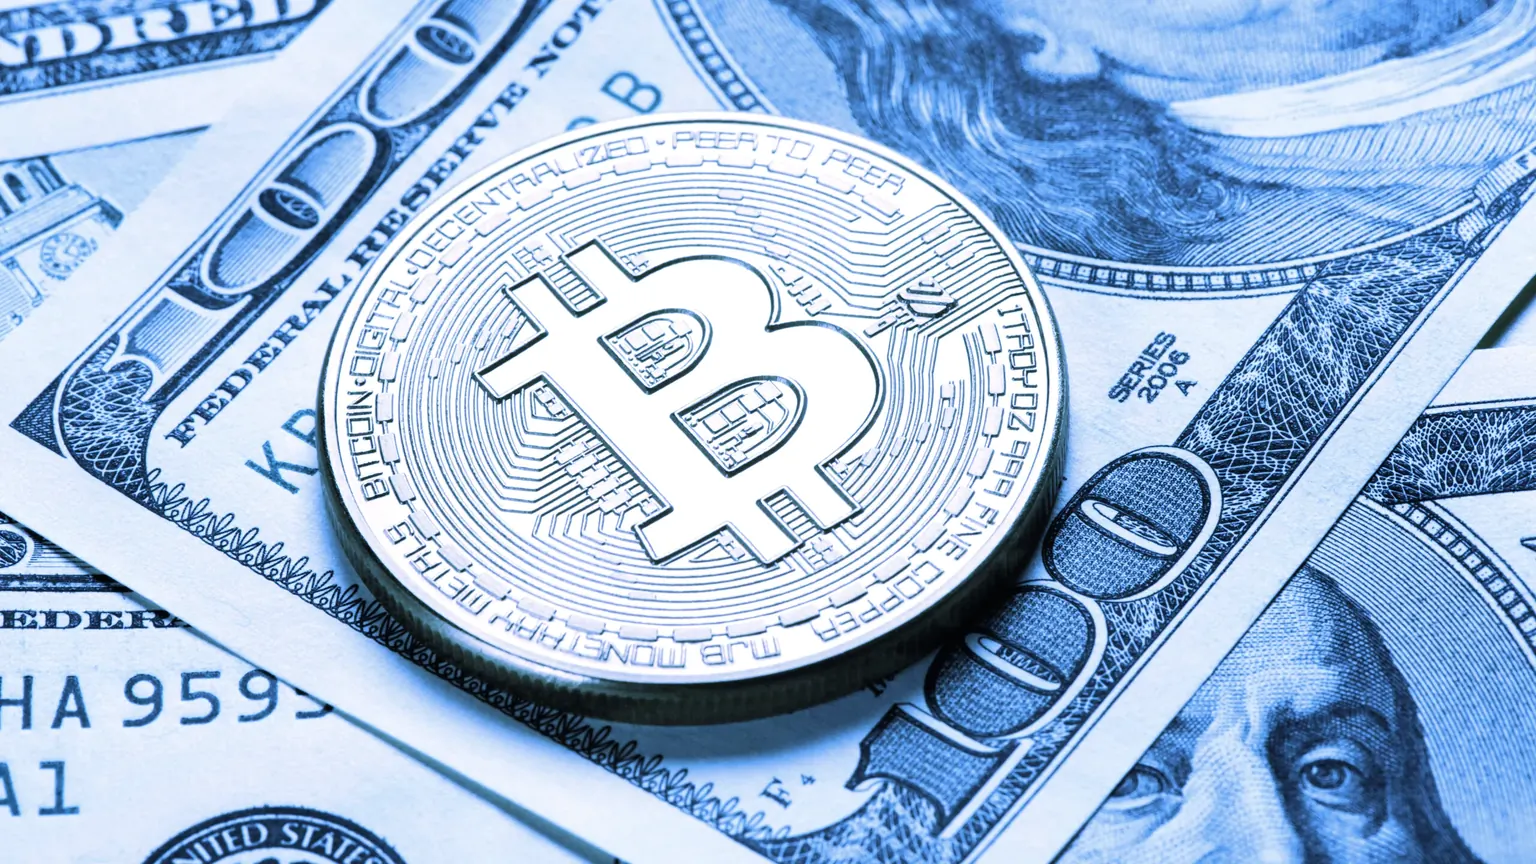 A top-ranked officials sees a future for Bitcoin. Image: Shutterstock